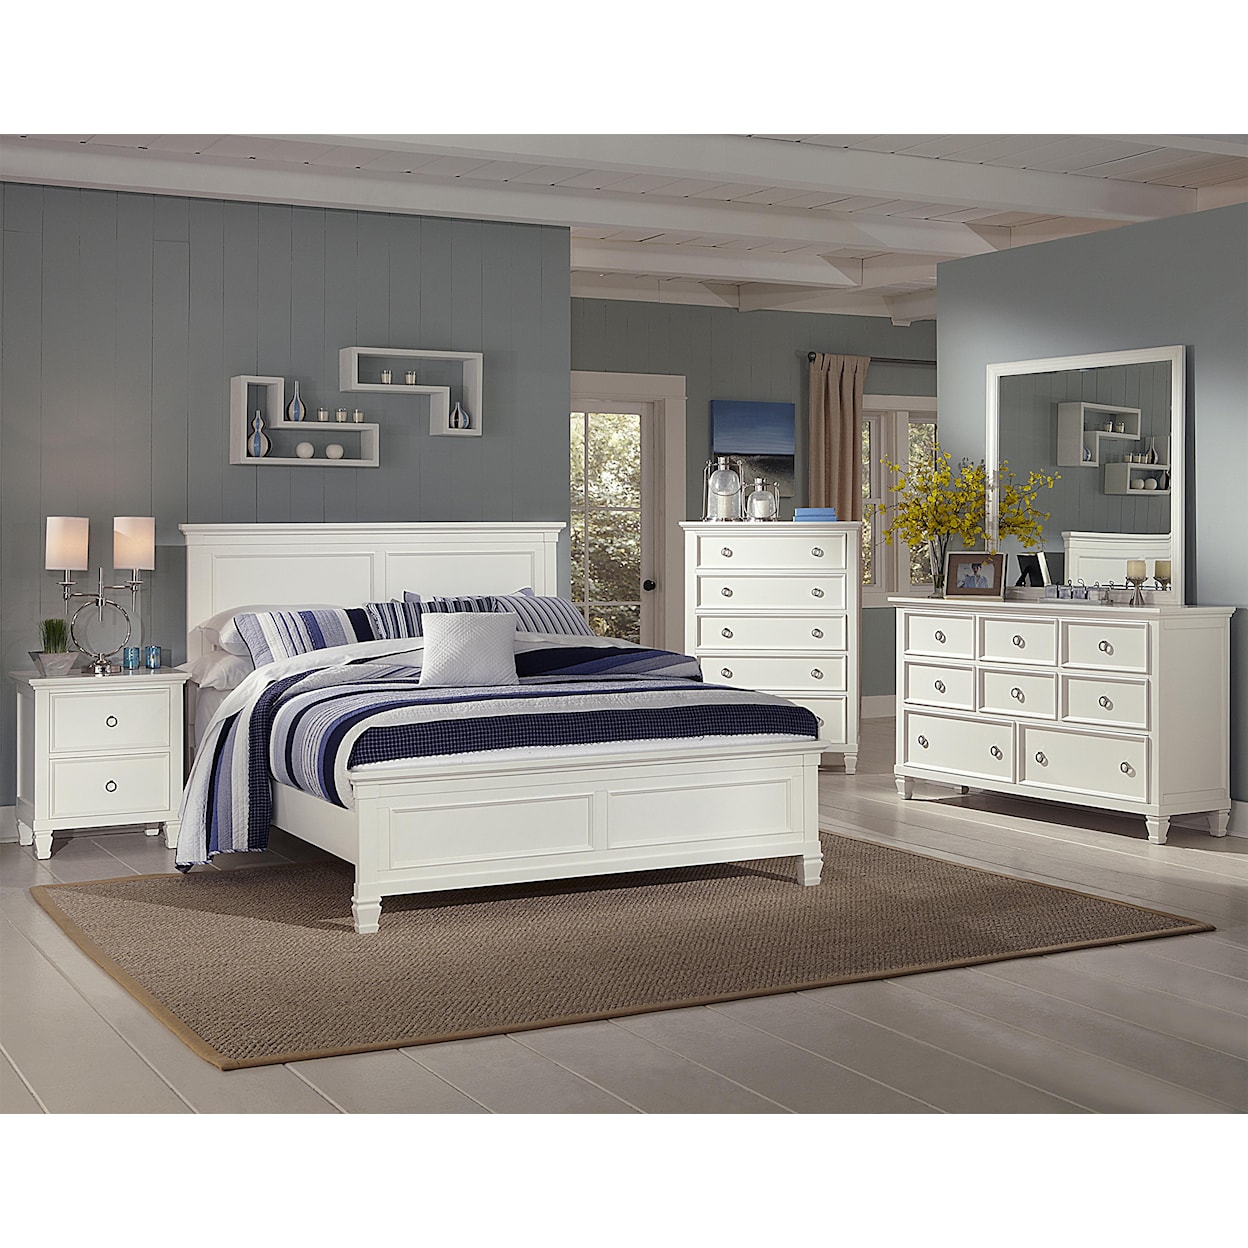 New Classic Countryside 8-Drawer Dresser